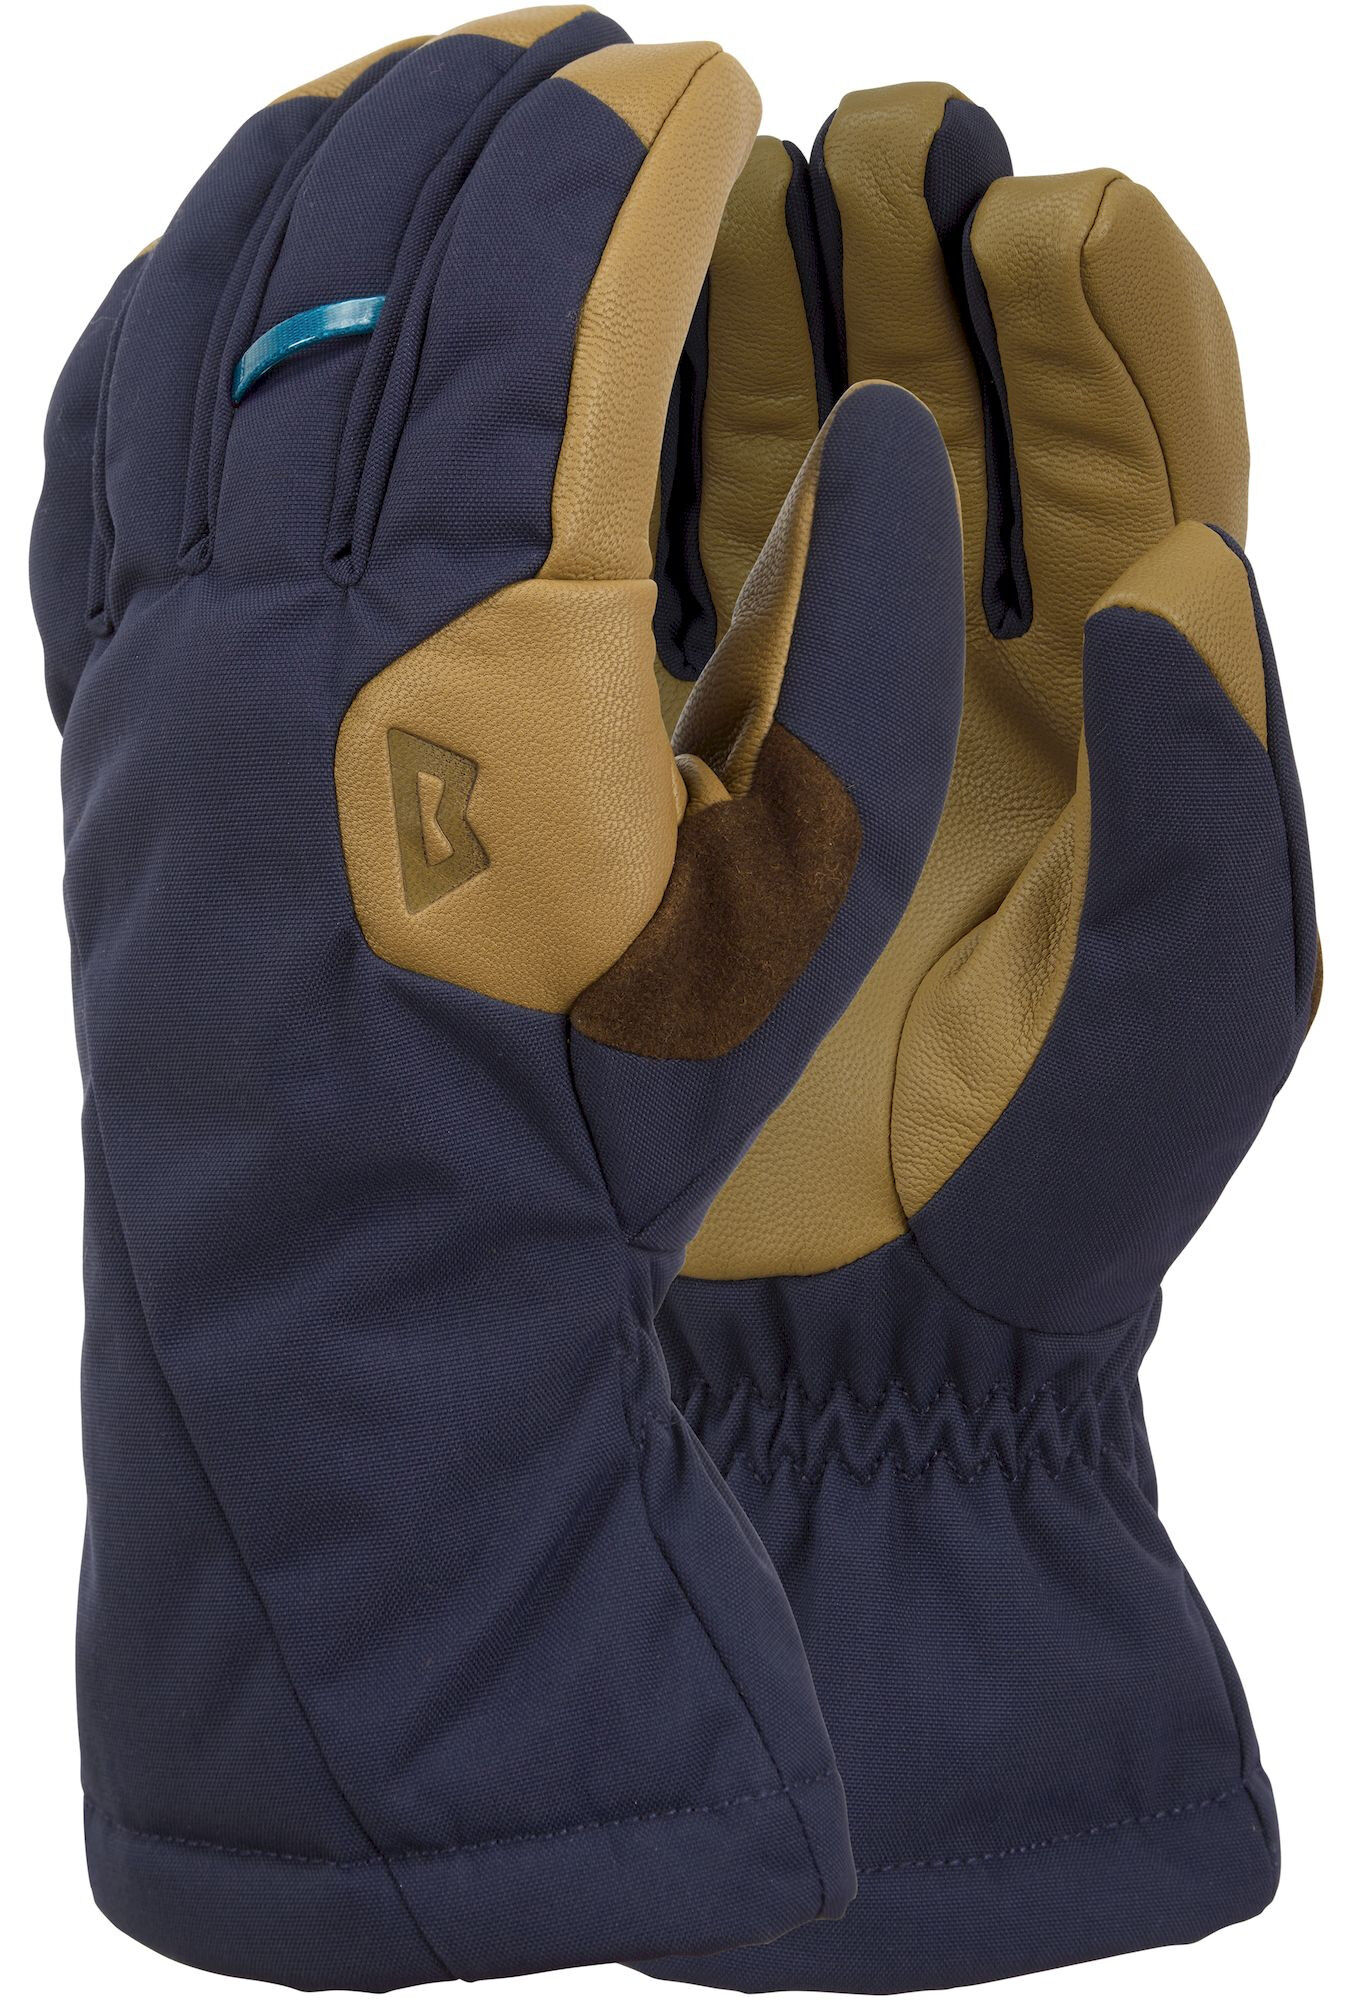 Mountain Equipment Guide Glove - Guantes alpinismo - Mujer | Hardloop